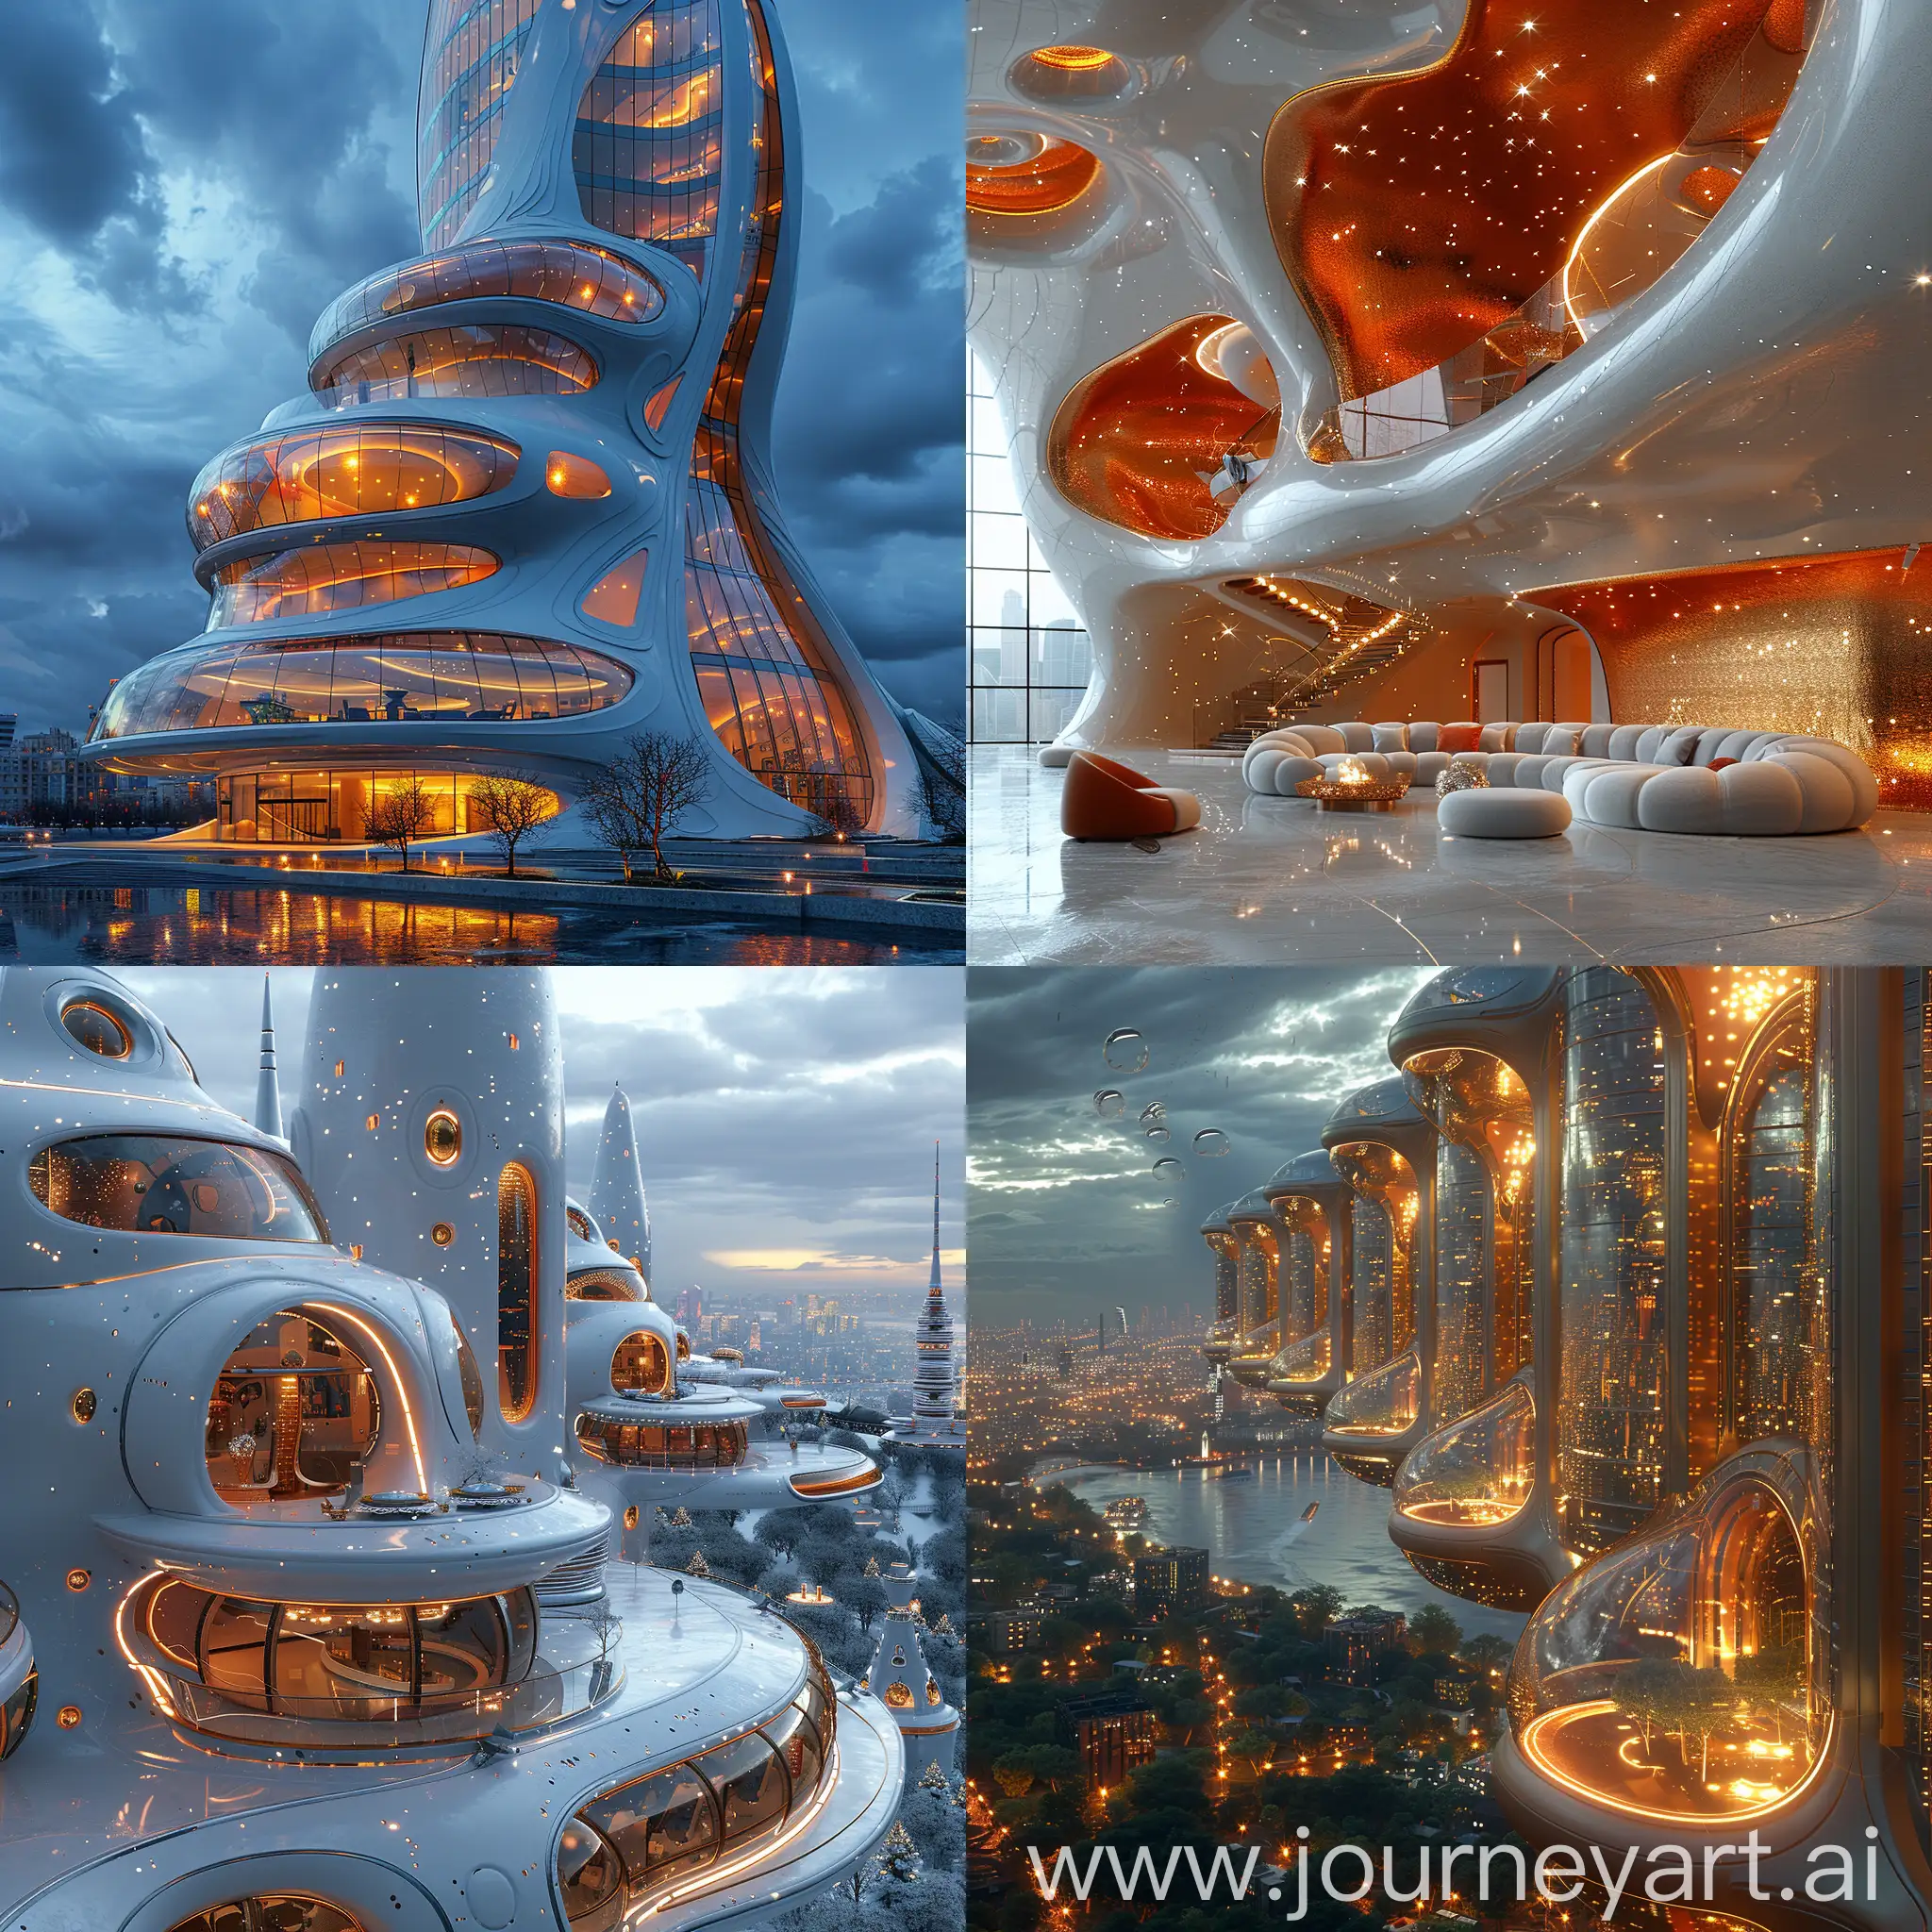 Futuristic-Moscow-UltraModern-Smart-Metals-and-HighTech-Style